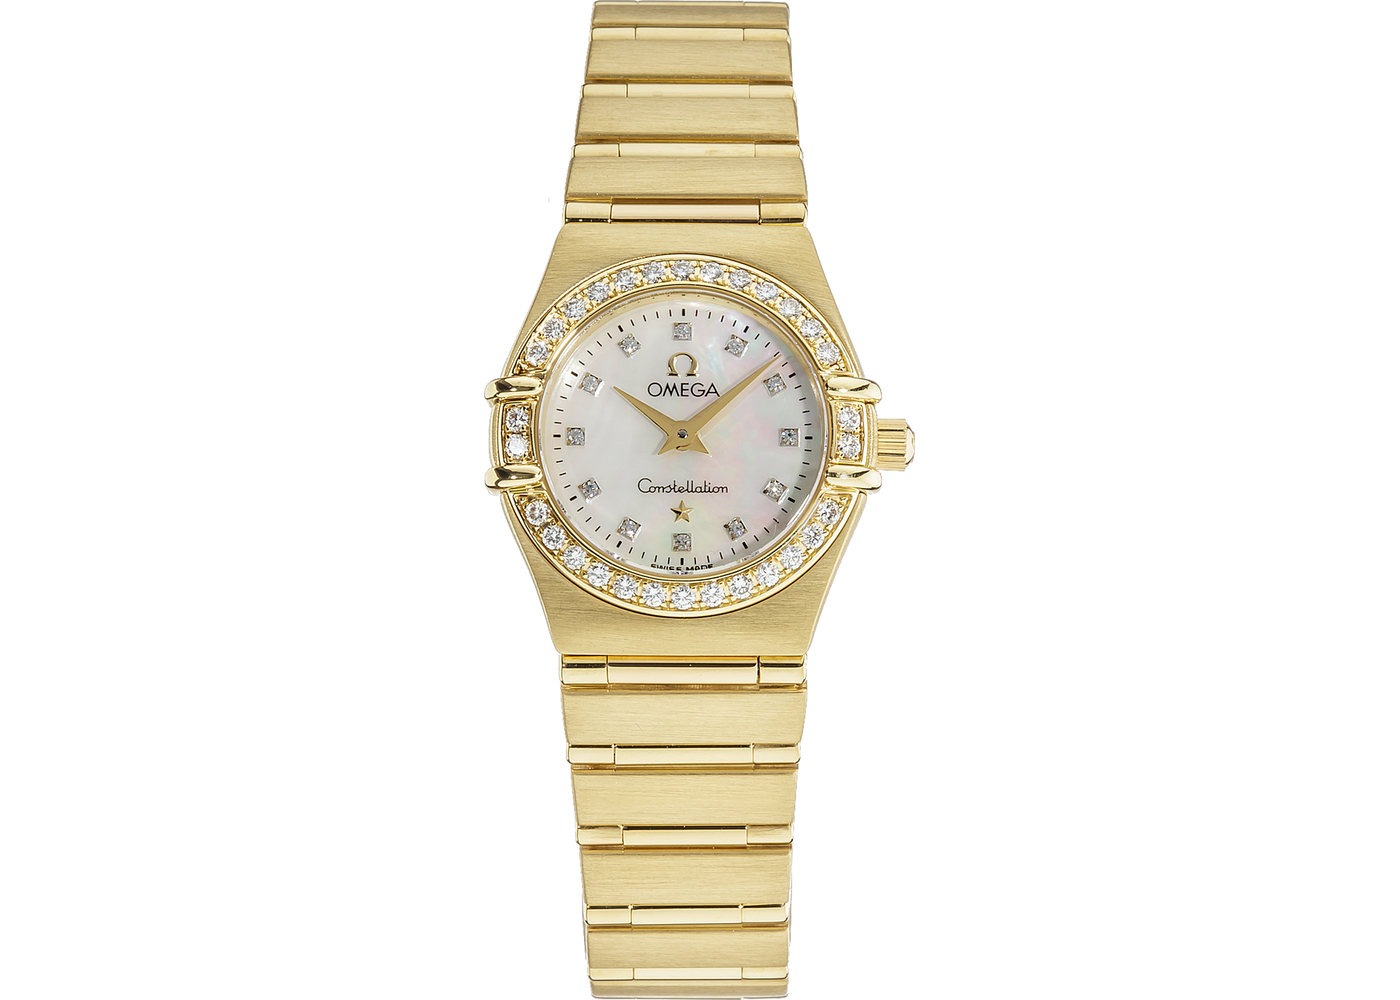 Constellation 95 in Yellow Gold with Diamond Bezel on Yellow Gold Bracelet with White MOP Diamond Dial